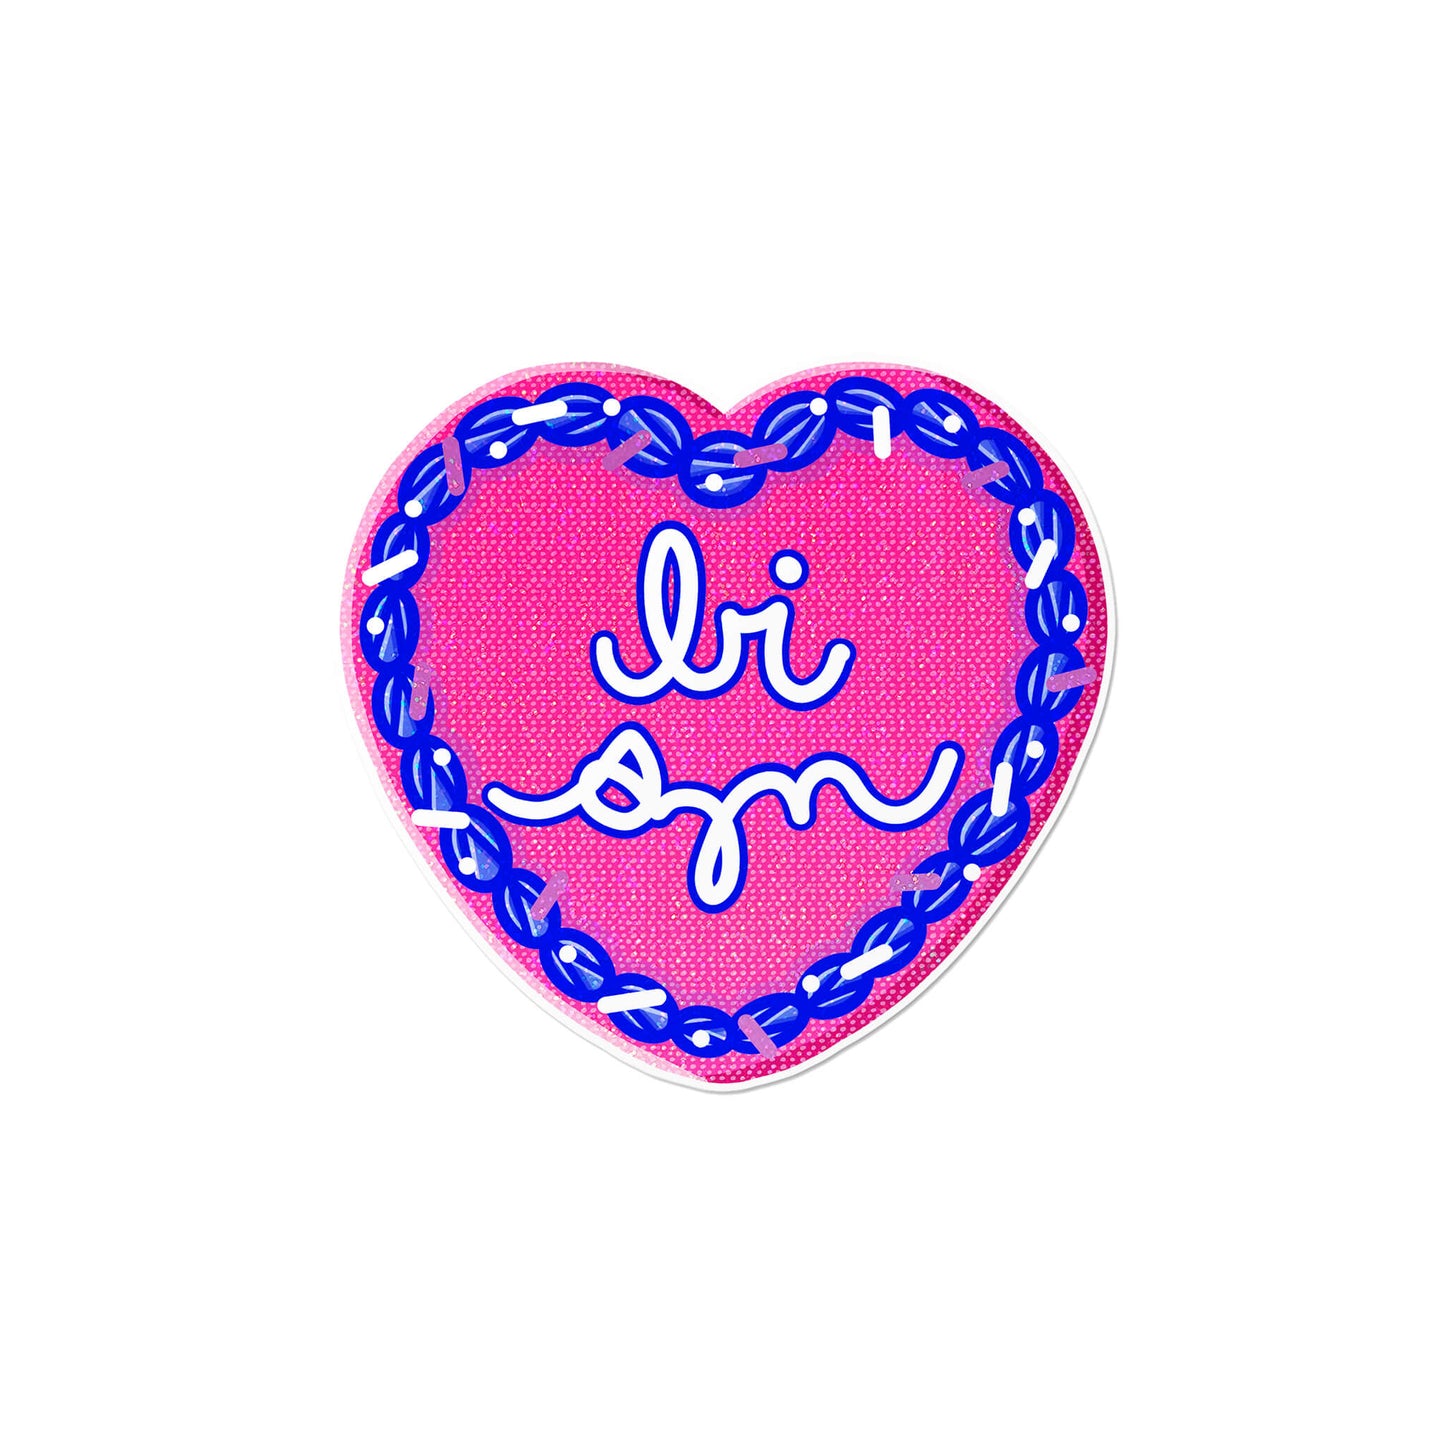 Holographic Bisexual Heart Cake Sticker